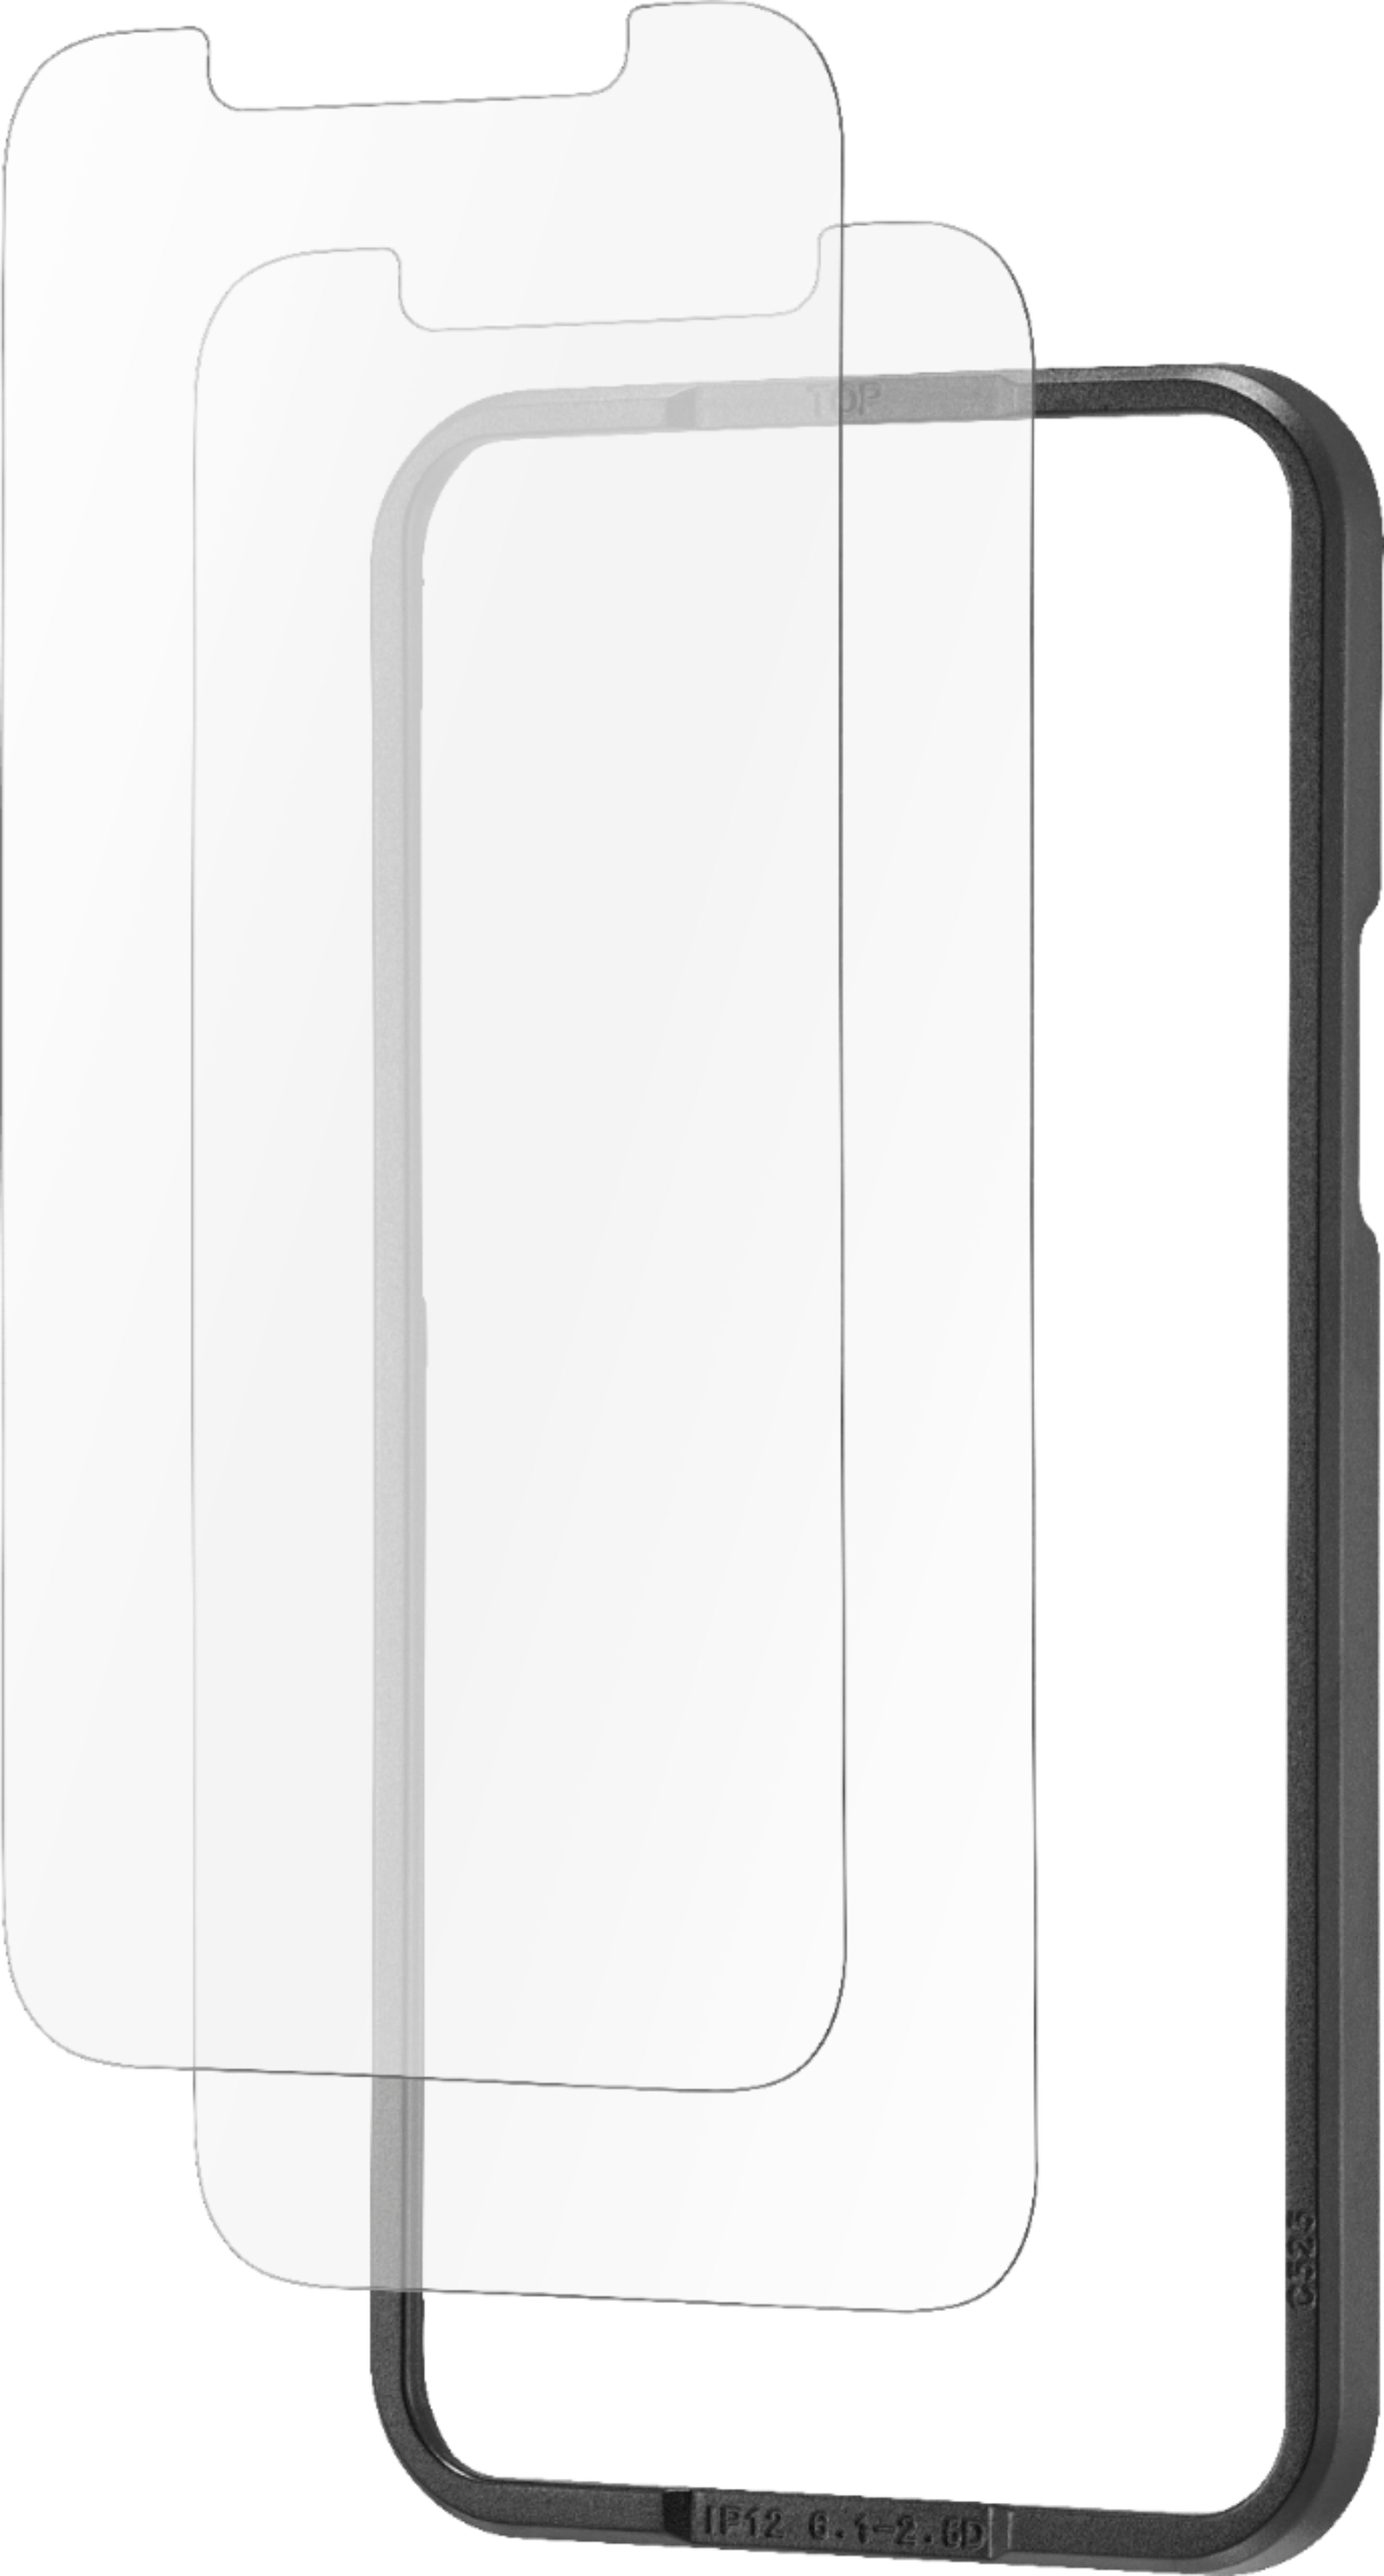 Angle View: Prodigee - Magneteek iPhone 12/12 PRO case - White